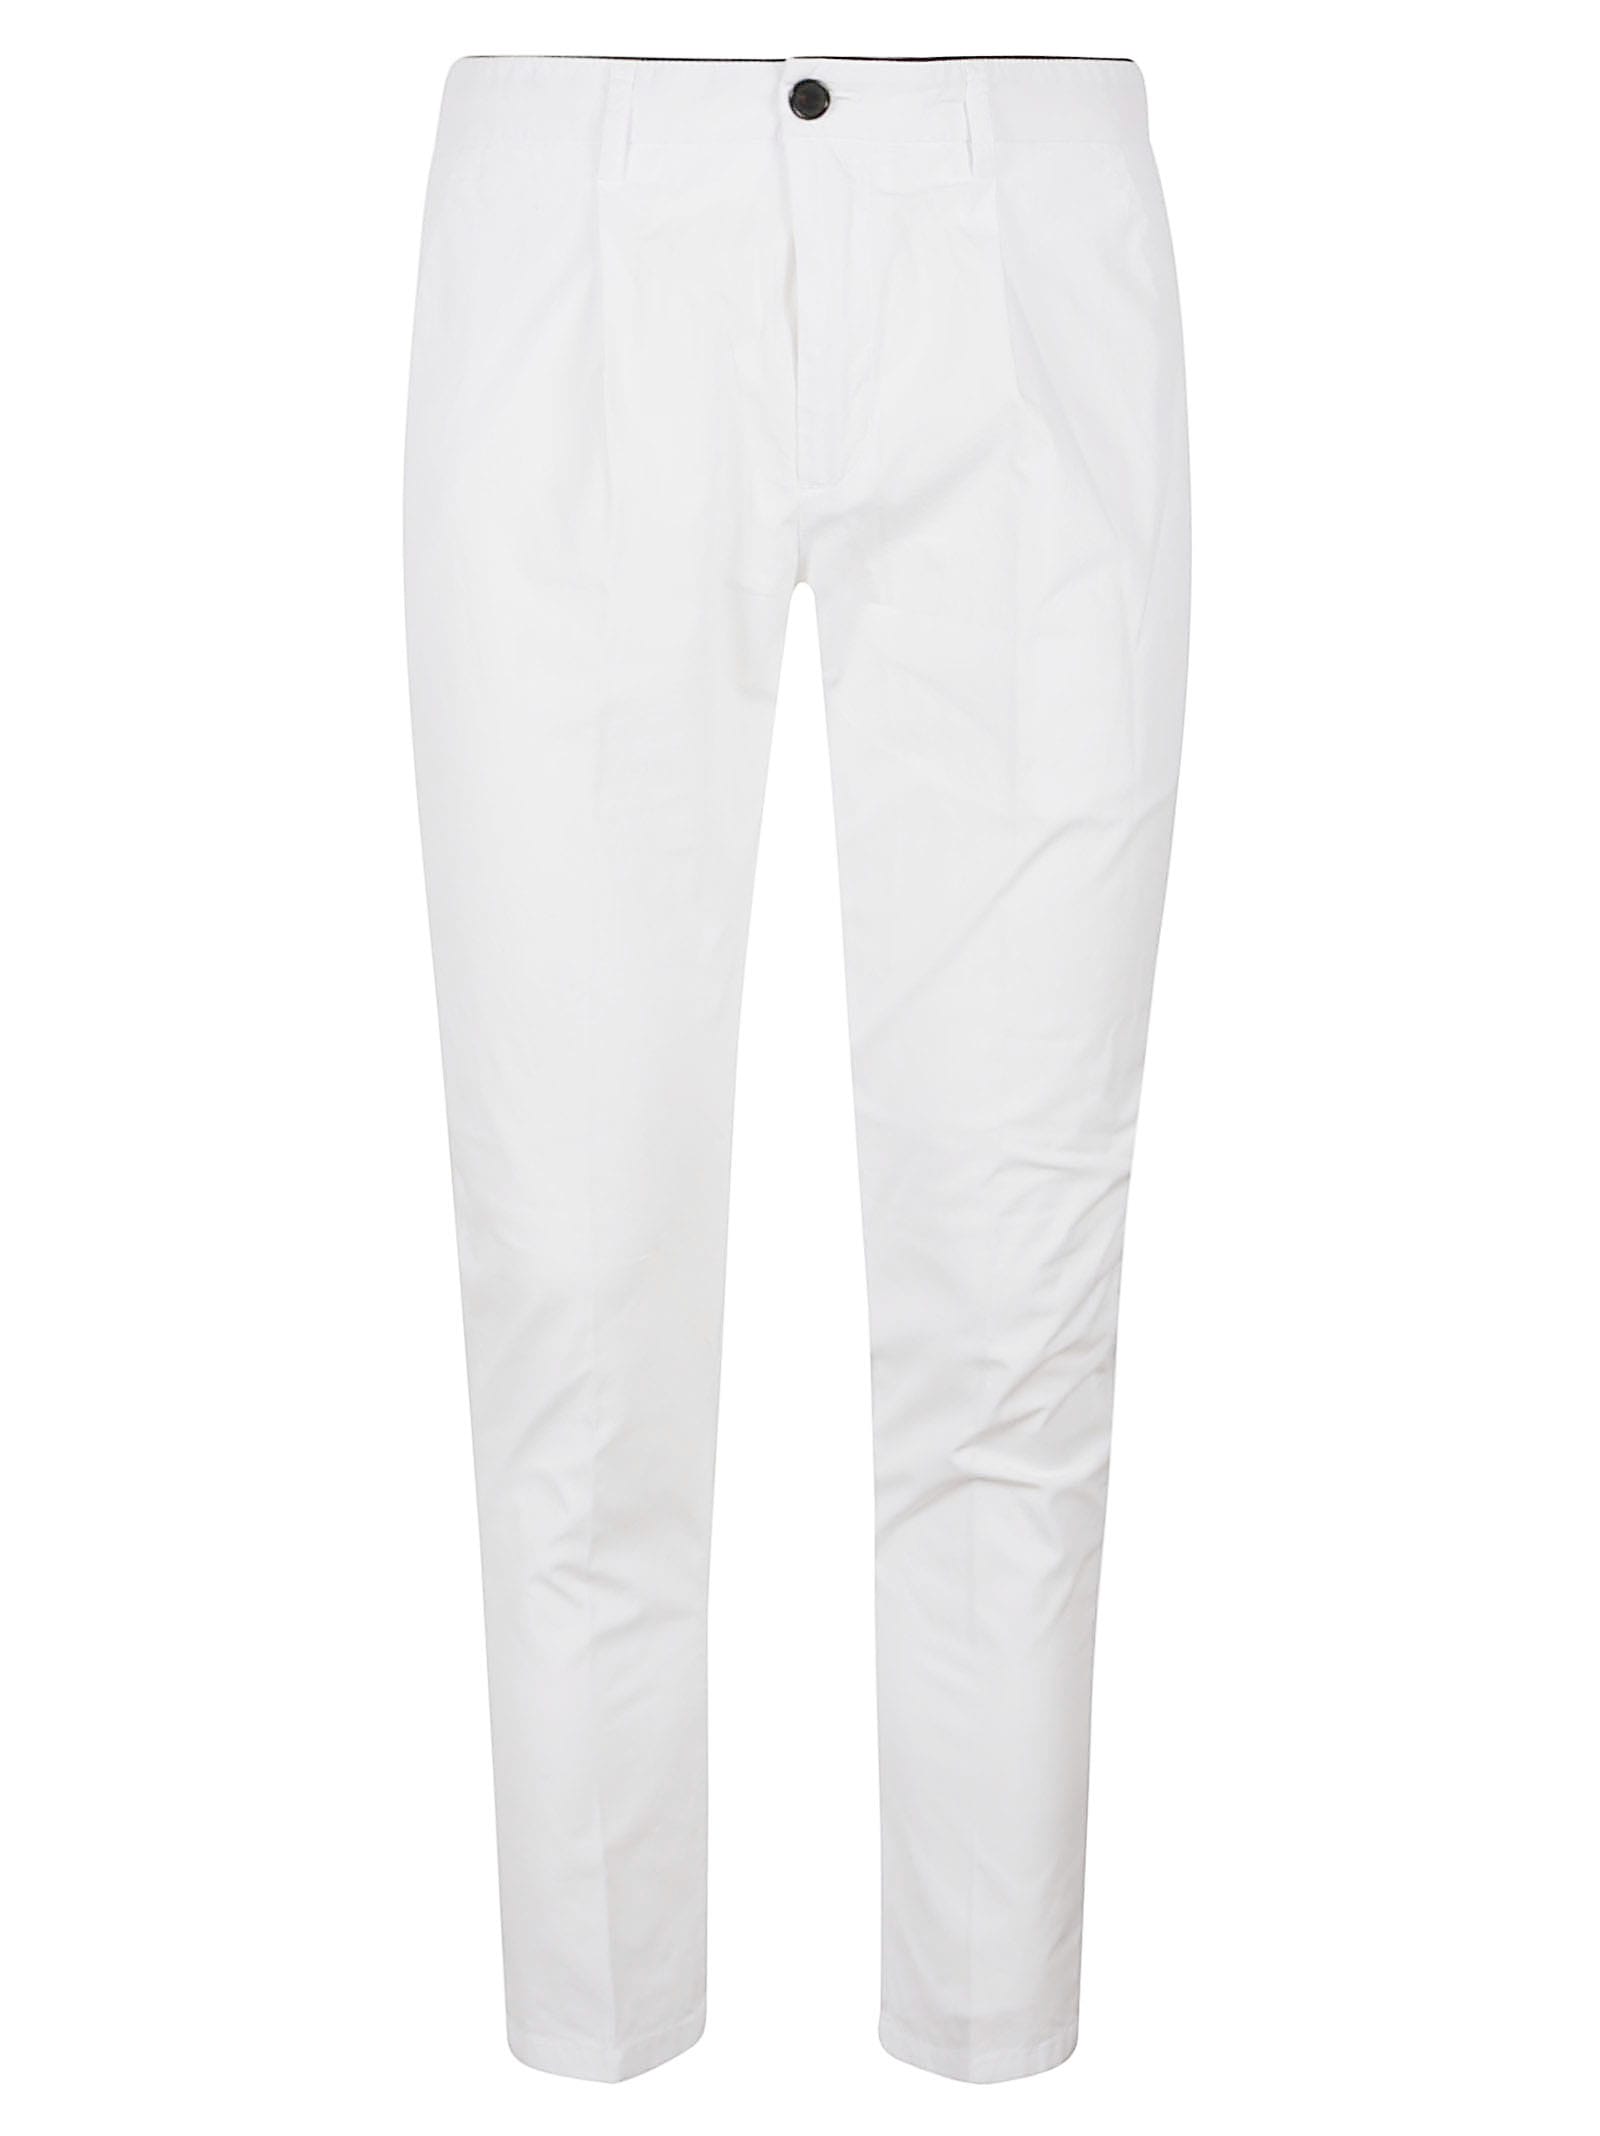 Department Five Prince Pences Chinos Pant In Bianco Ottico